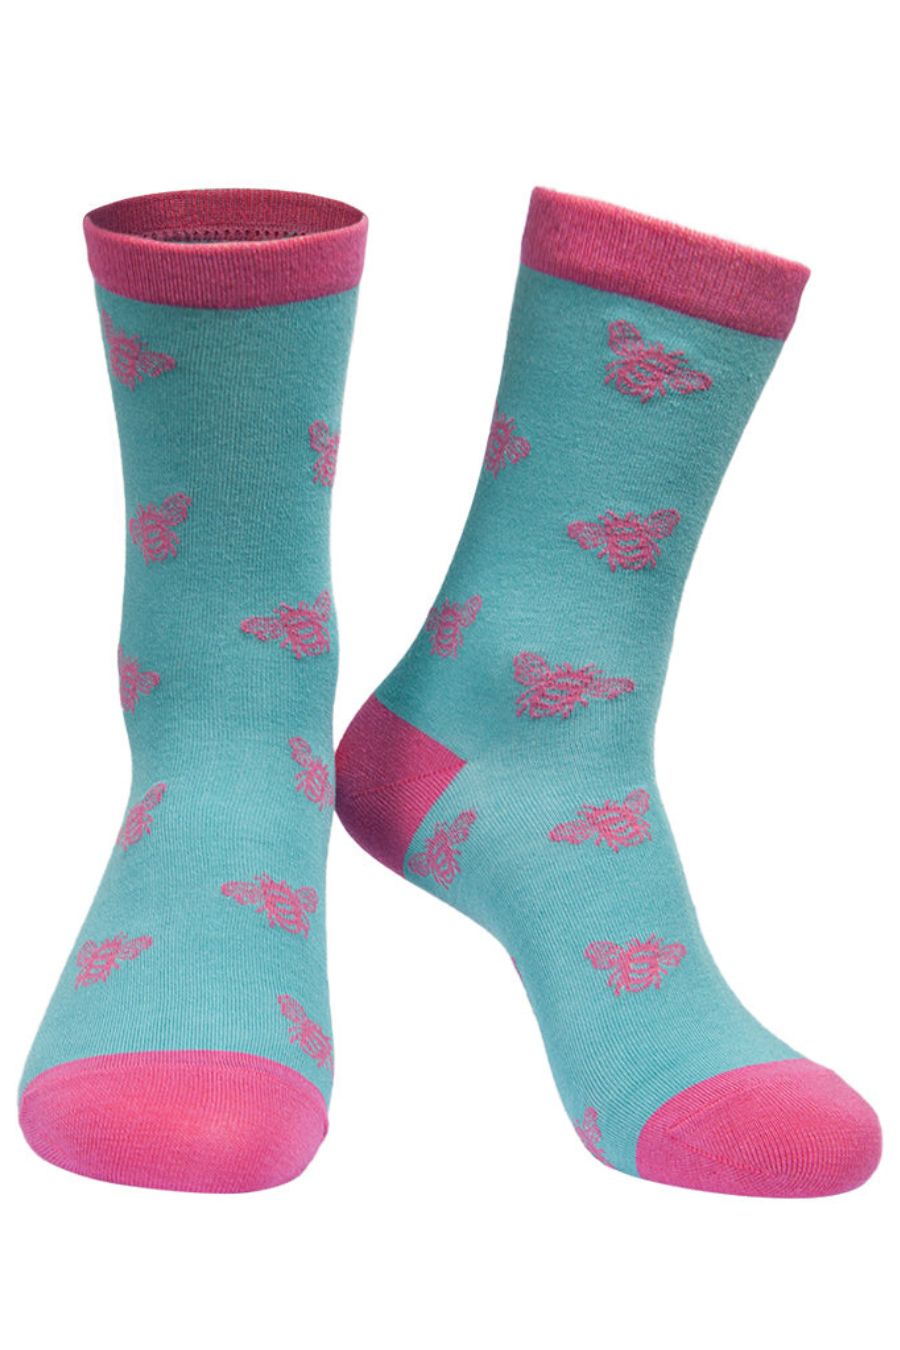 teal, pink ankle socks with a pink bee pattern